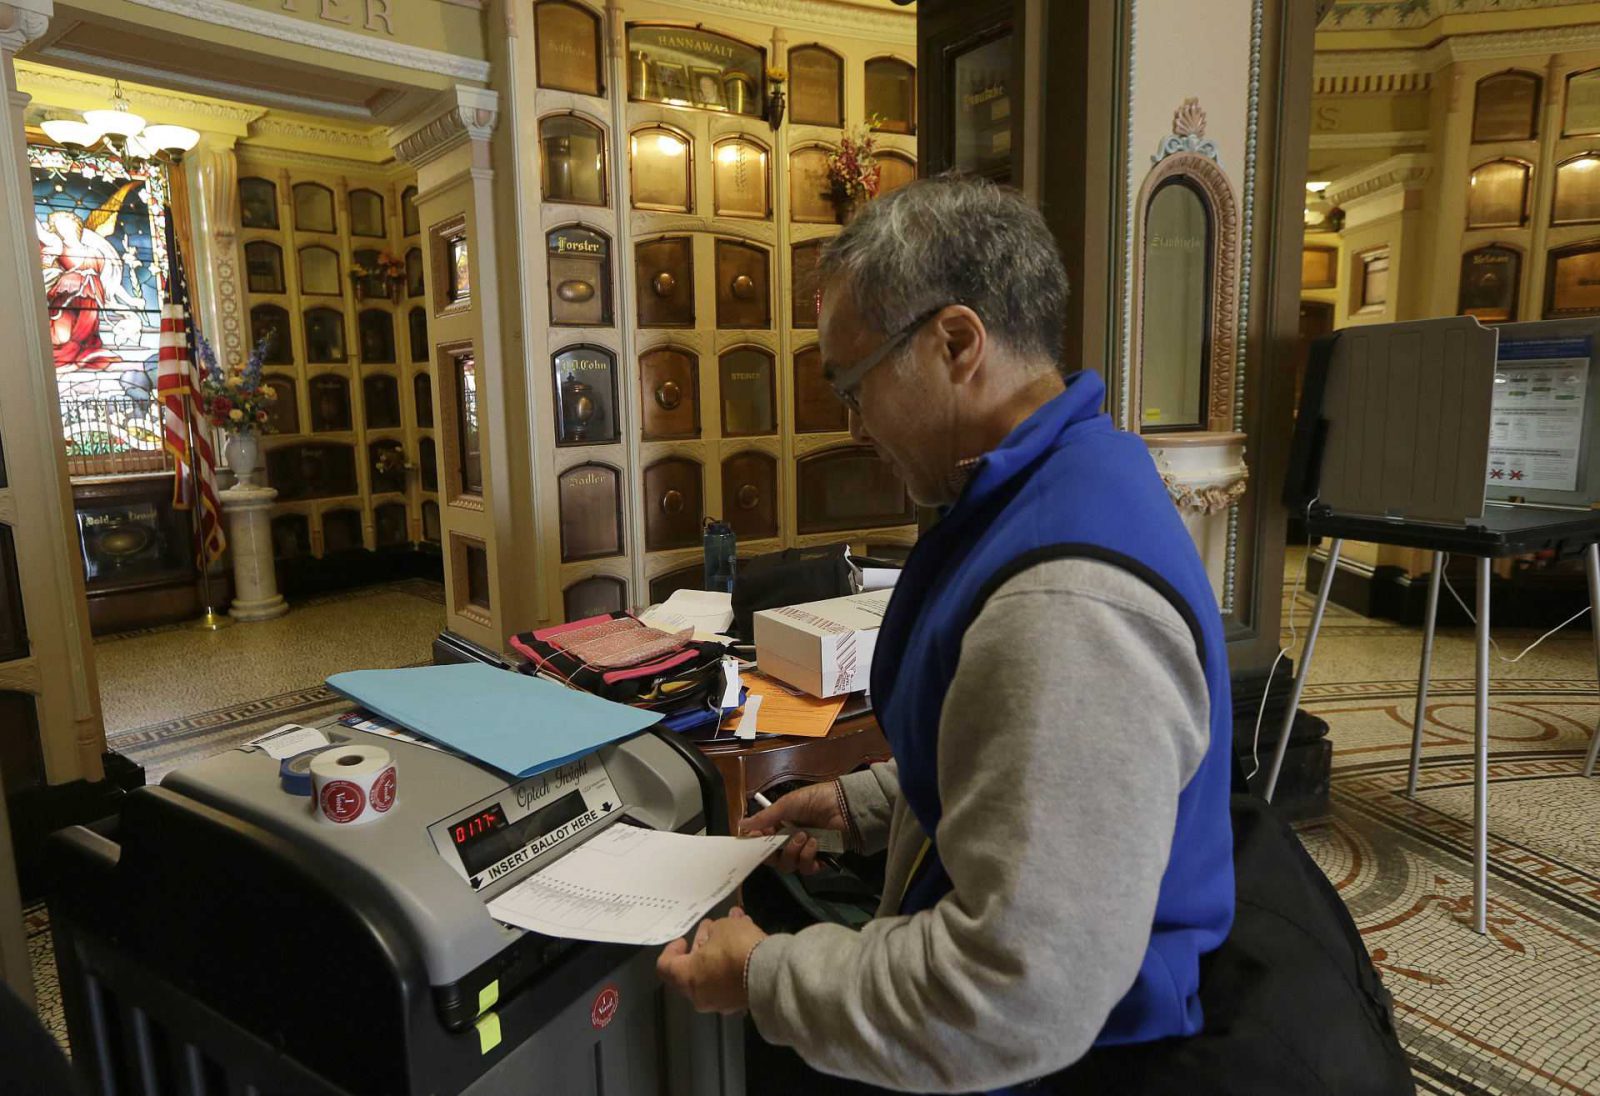 Jeff Young enters a ballot into a voting machine at the Neptune Society Columbarium, one of the last remaining cemeteries in San Francisco, Tuesday, June 7, 2016. Voter turnout is expected to be higher then normal in the nation's most populous state for Tuesday's presidential primary. (AP Photo/Jeff Chiu)